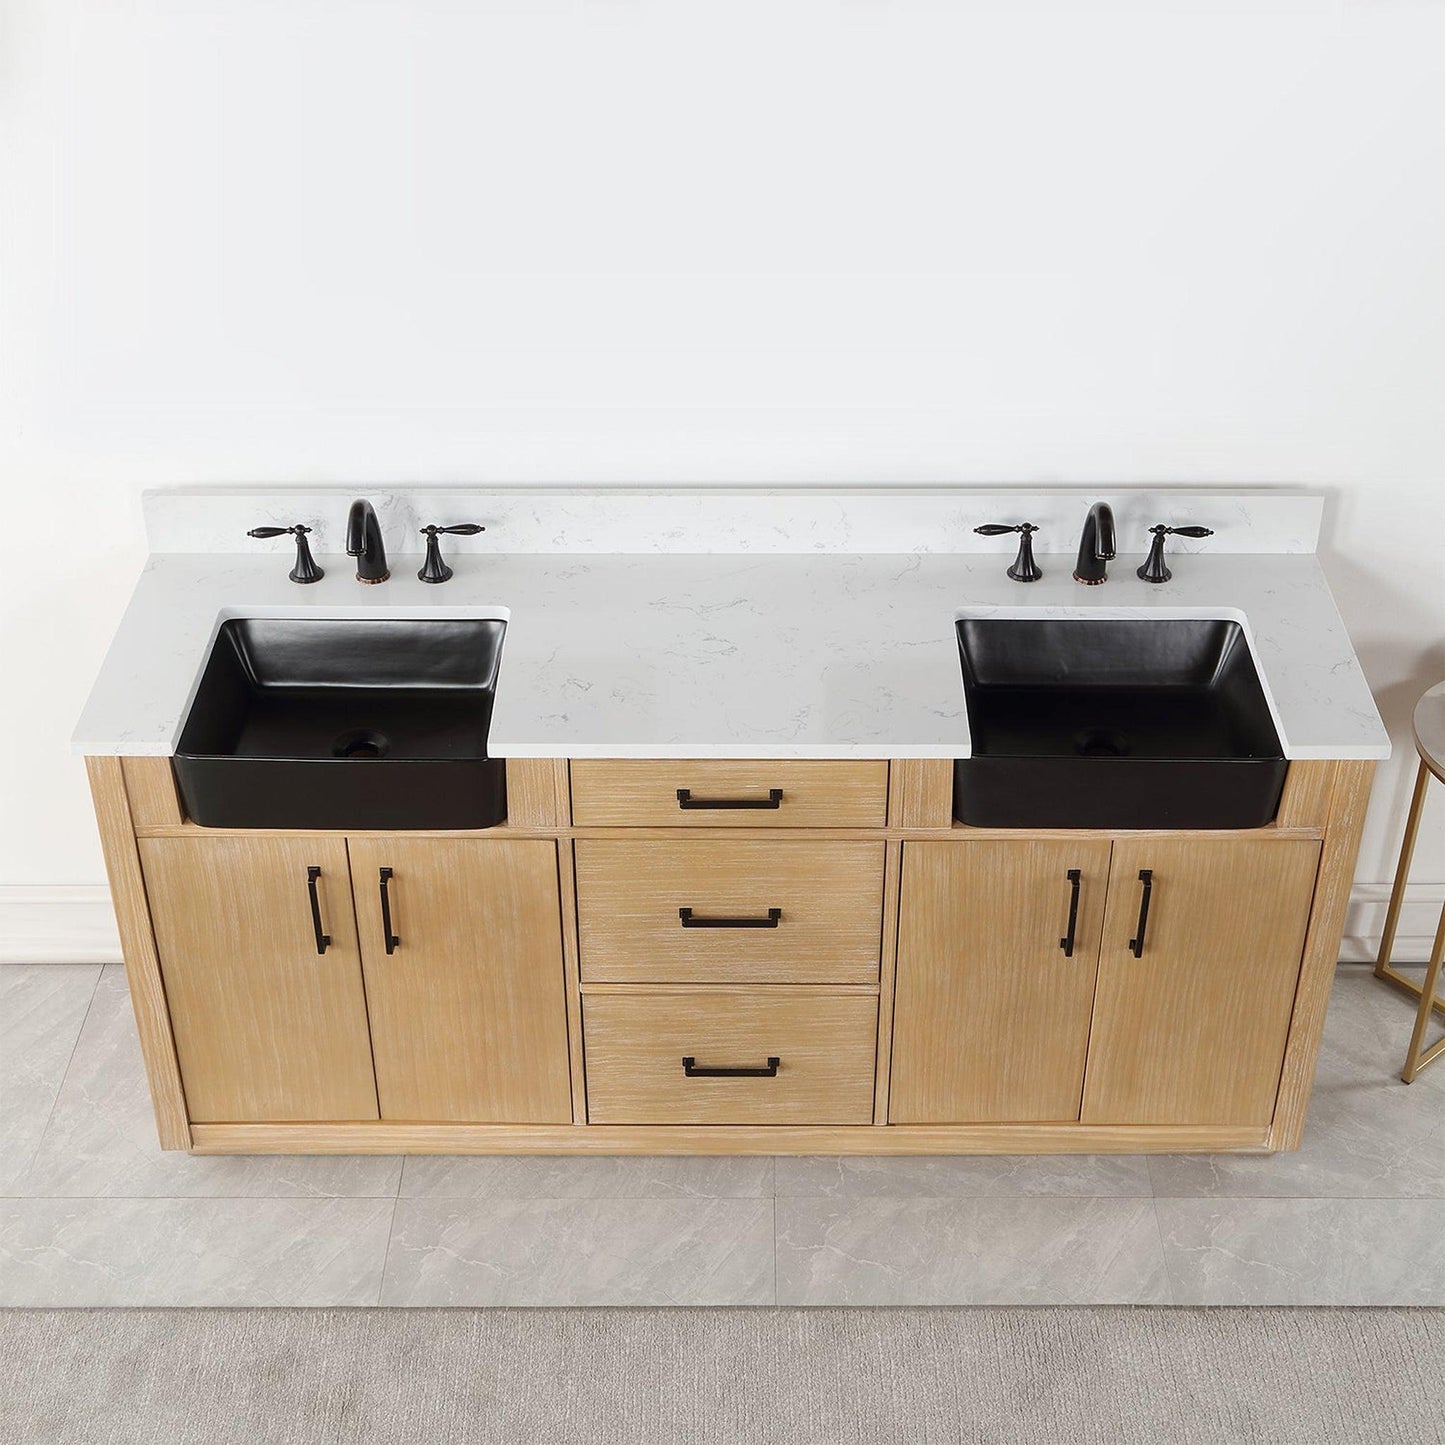 Altair Novago 72" Weathered Pine Freestanding Double Bathroom Vanity Set With Aosta White Composite Stone Top, Double Rectangular Drop-In Black Farmhouse Ceramic Sinks, Overflow, and Backsplash